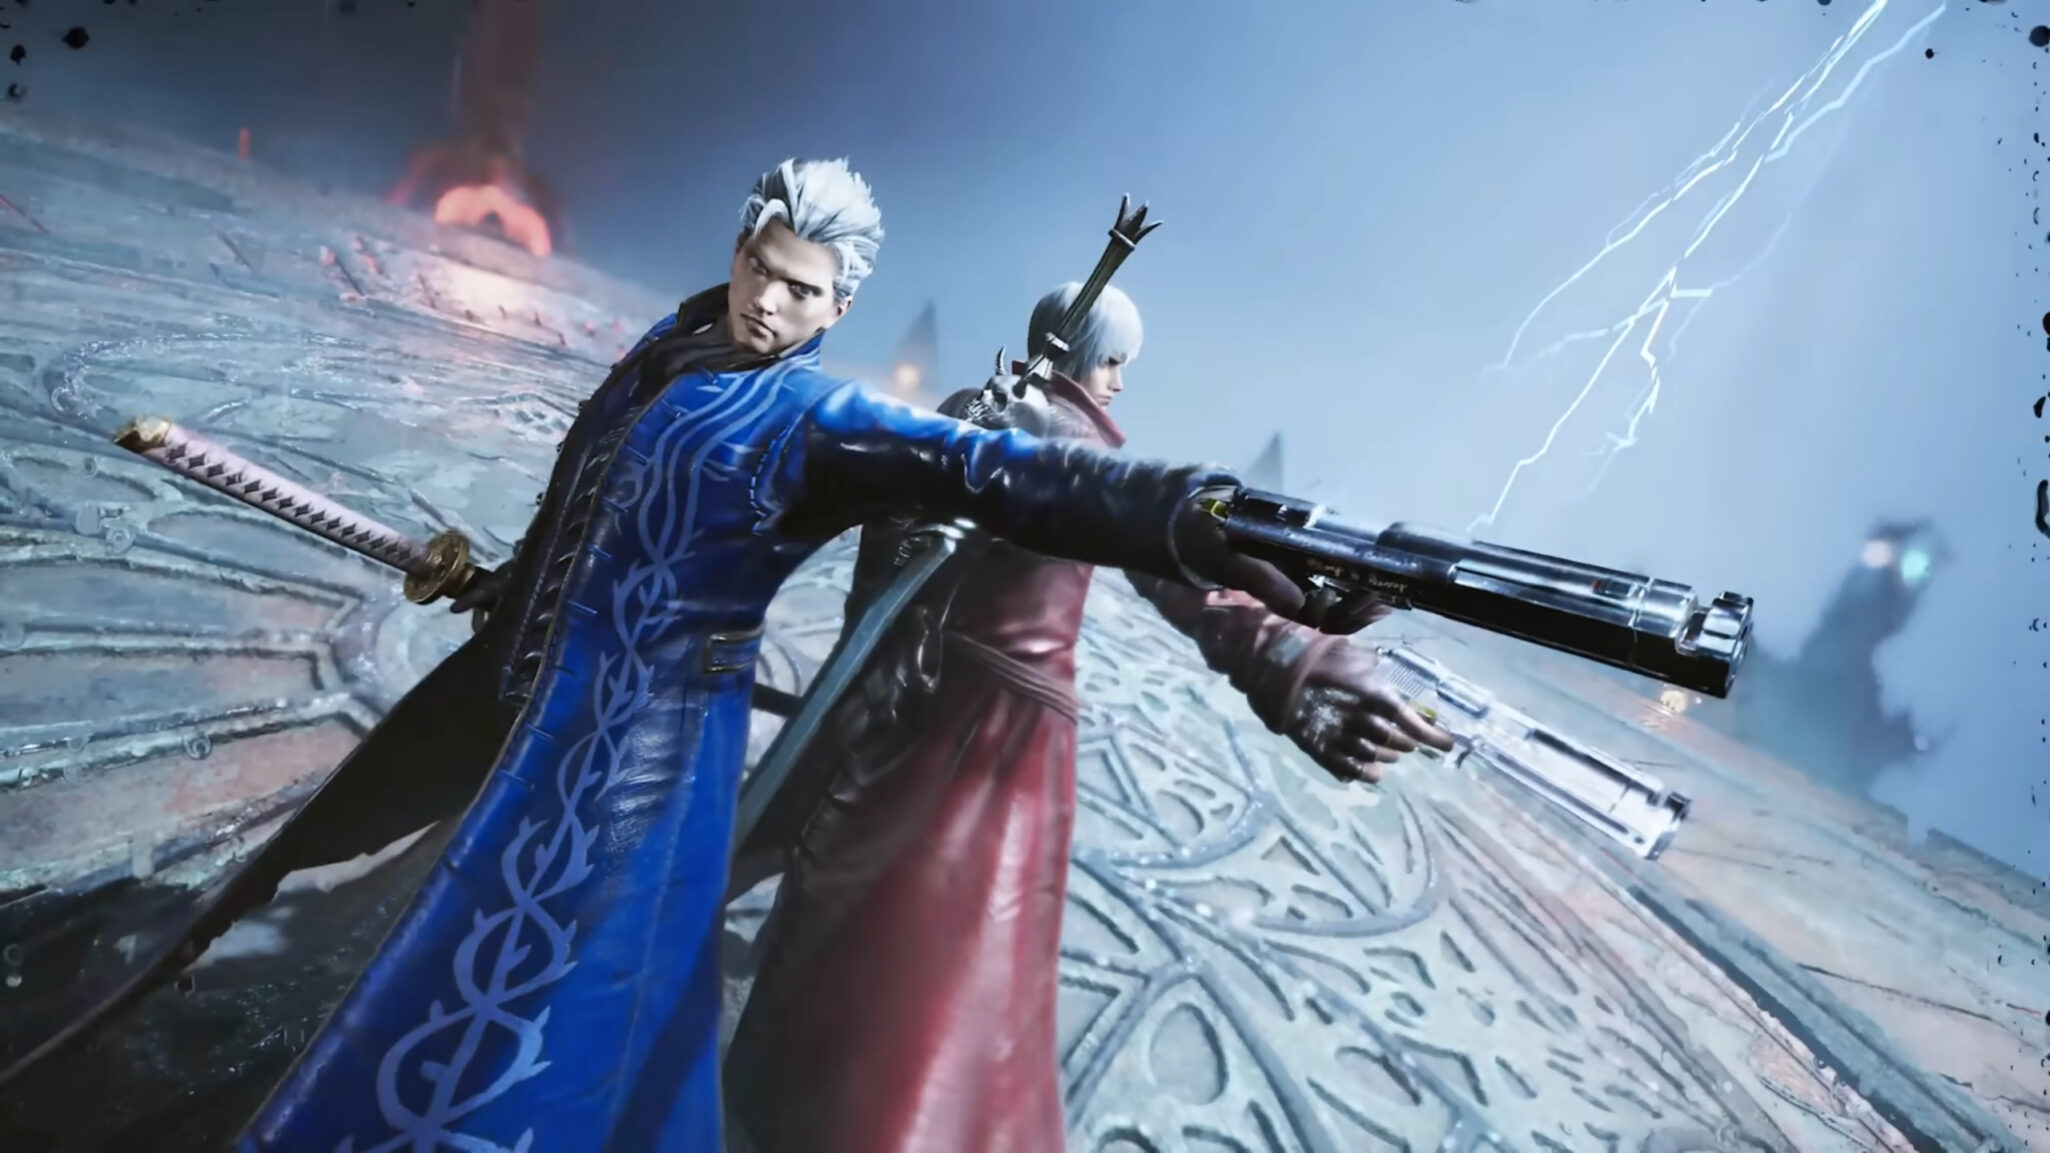 Devil May Cry: Peak of Combat Mobile Game English Release Date Set